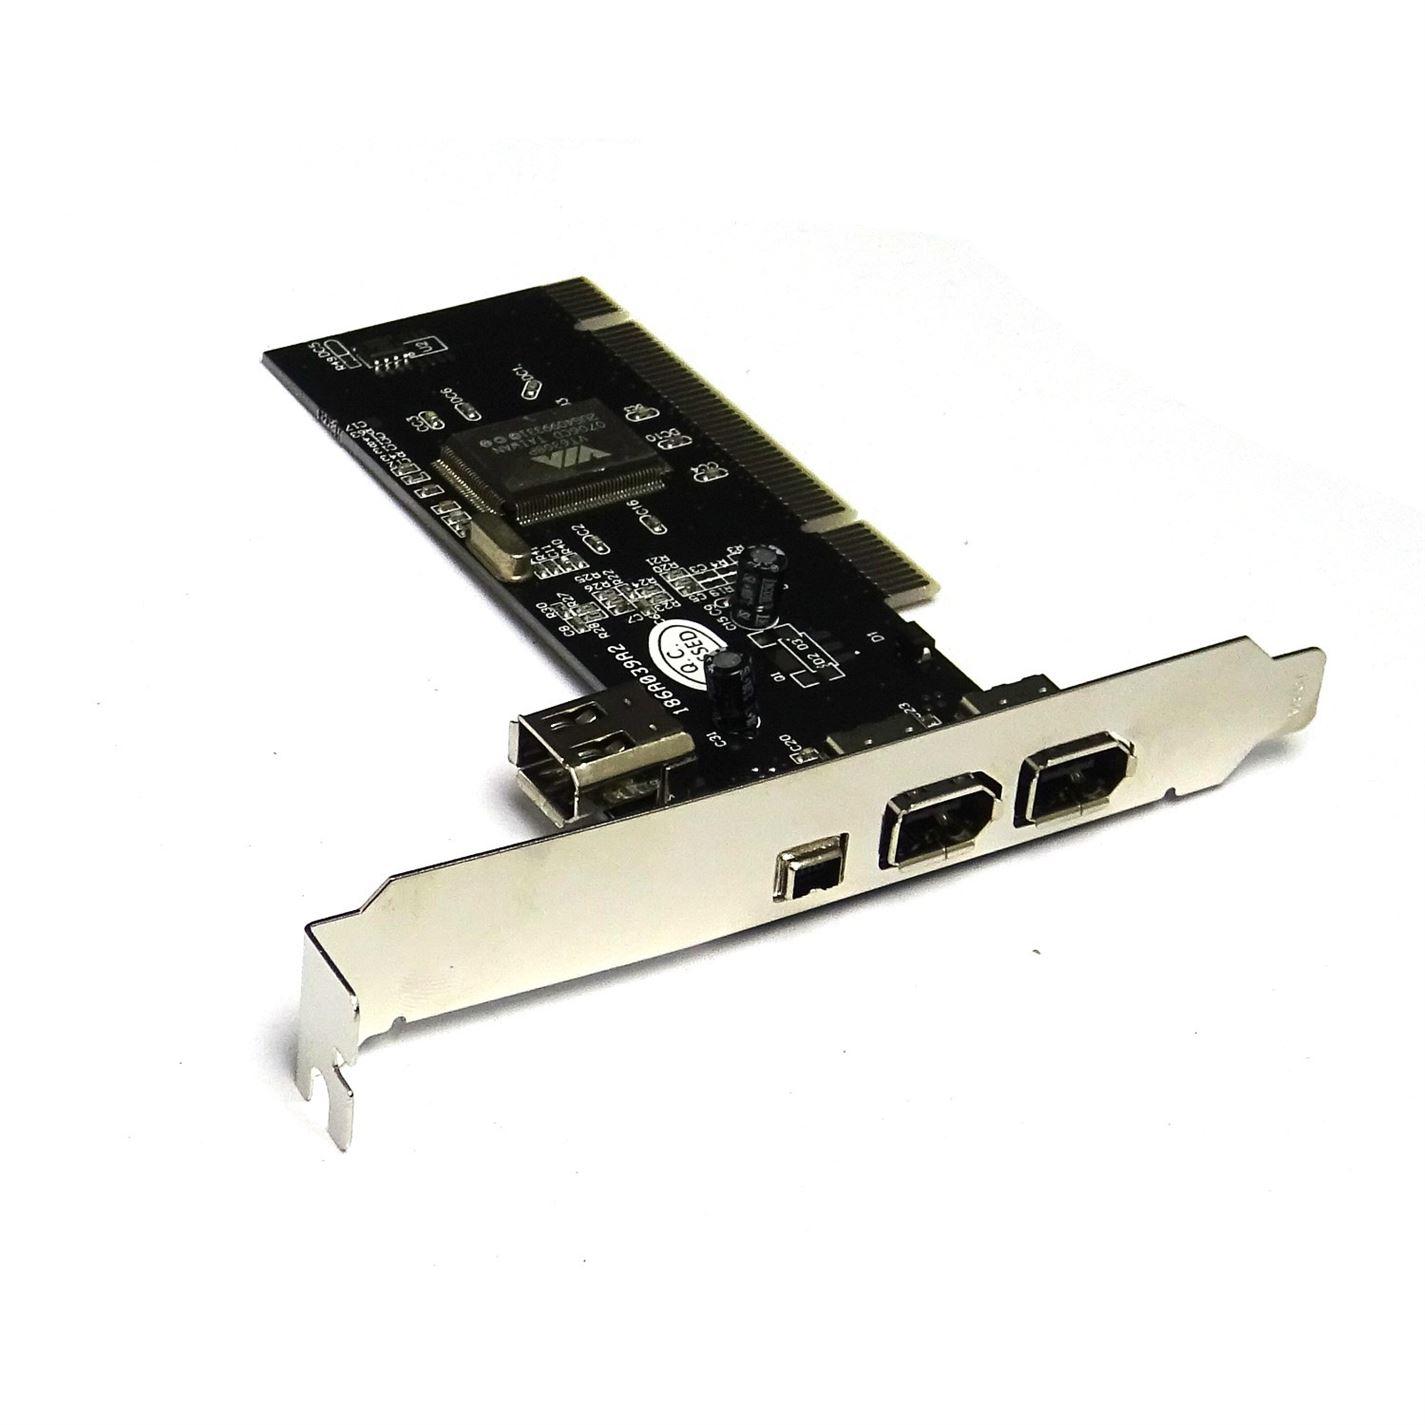 PCI FireWire IEEE 1394 3 + 1 Port Card + 4/6 Pin Cable - UK Seller